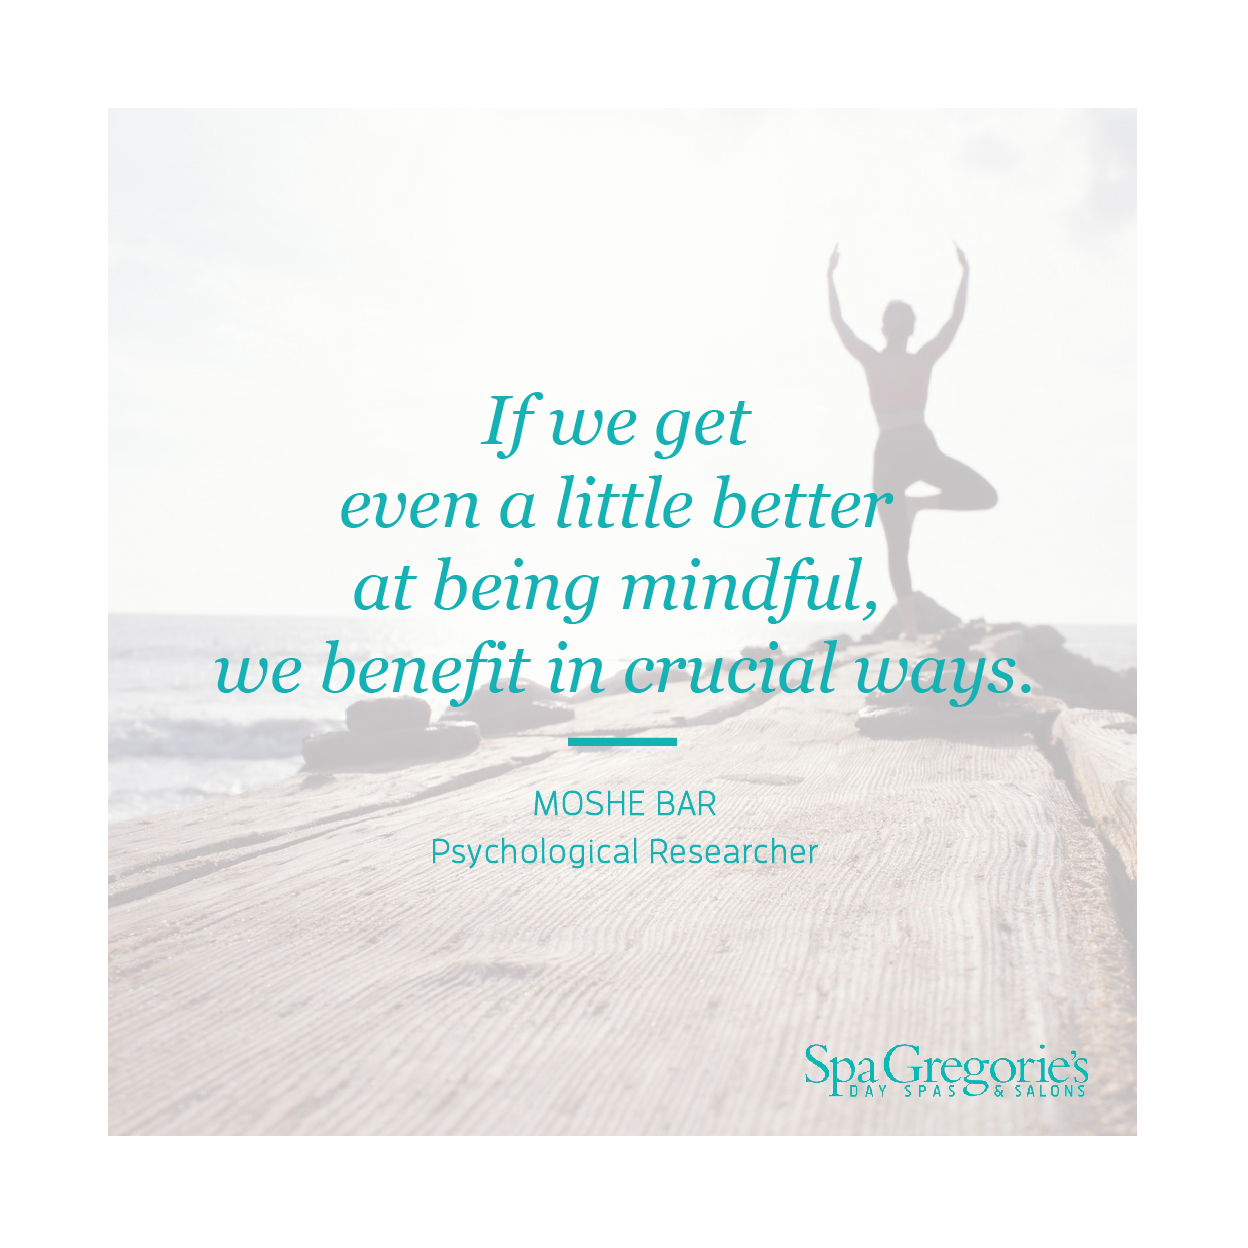 Picture with woman doing yoga by the beach with text over it that says "If we get even a little better at being mindful, we benefit in crucial ways," a quote from Moshe Bar, a psychological researcher.